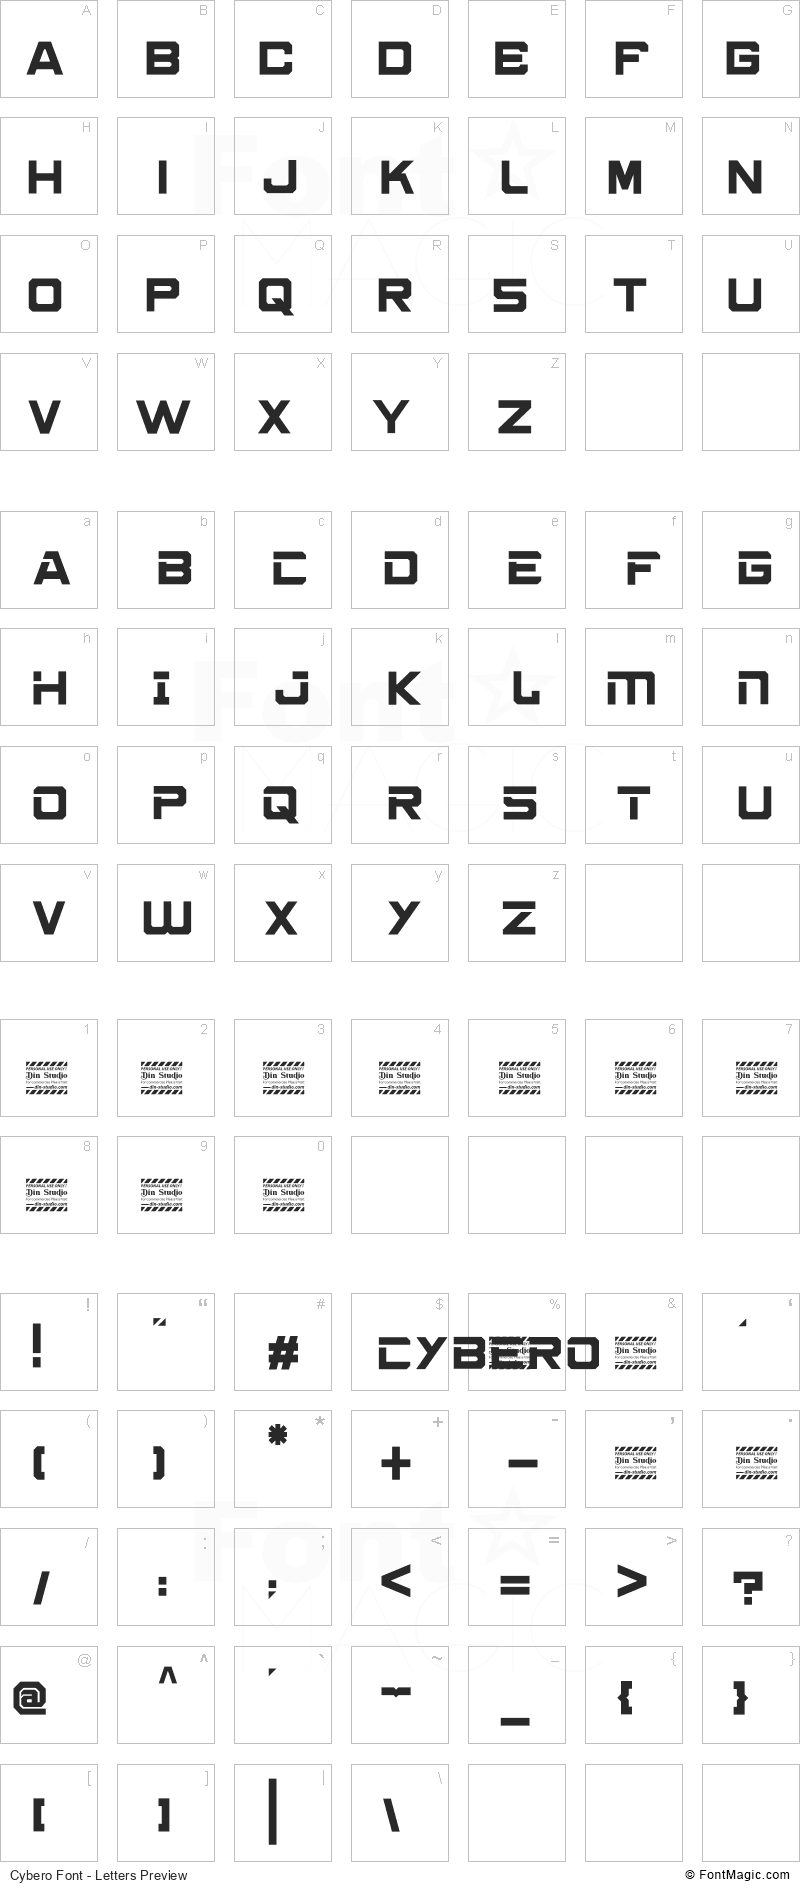 Cybero Font - All Latters Preview Chart